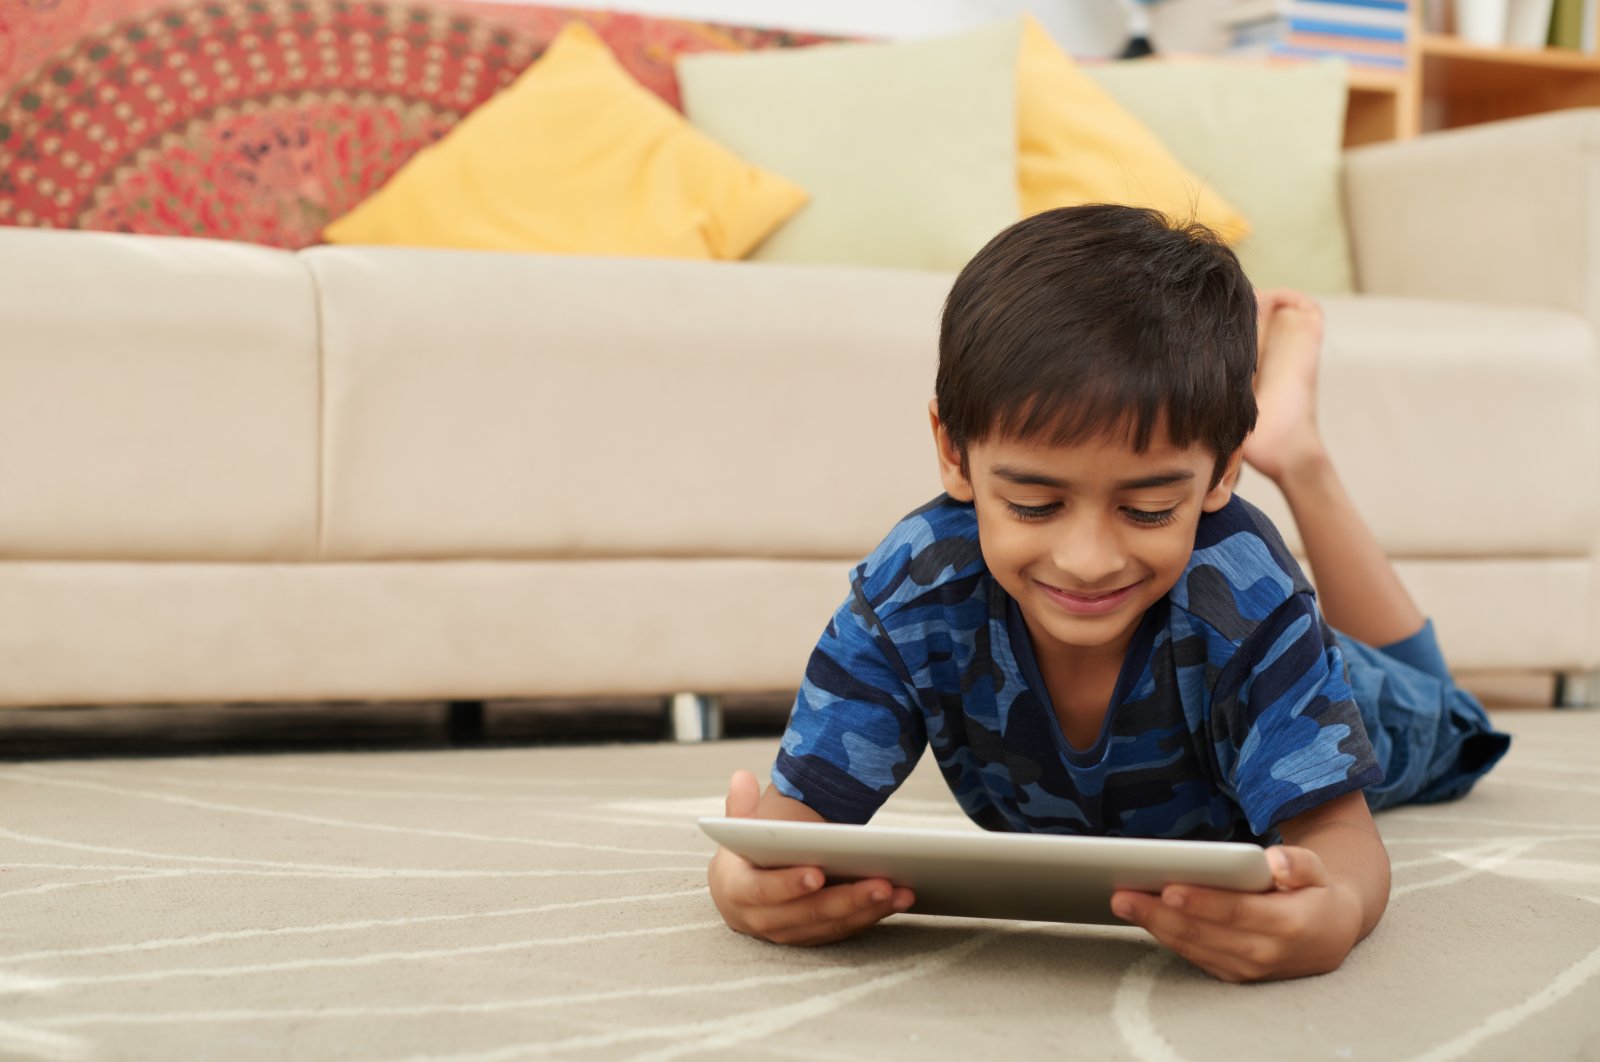 Parents should be careful to monitor their children&#039;s screen time and the digital content they are exposed to, according to experts. (Shutterstock Photo)